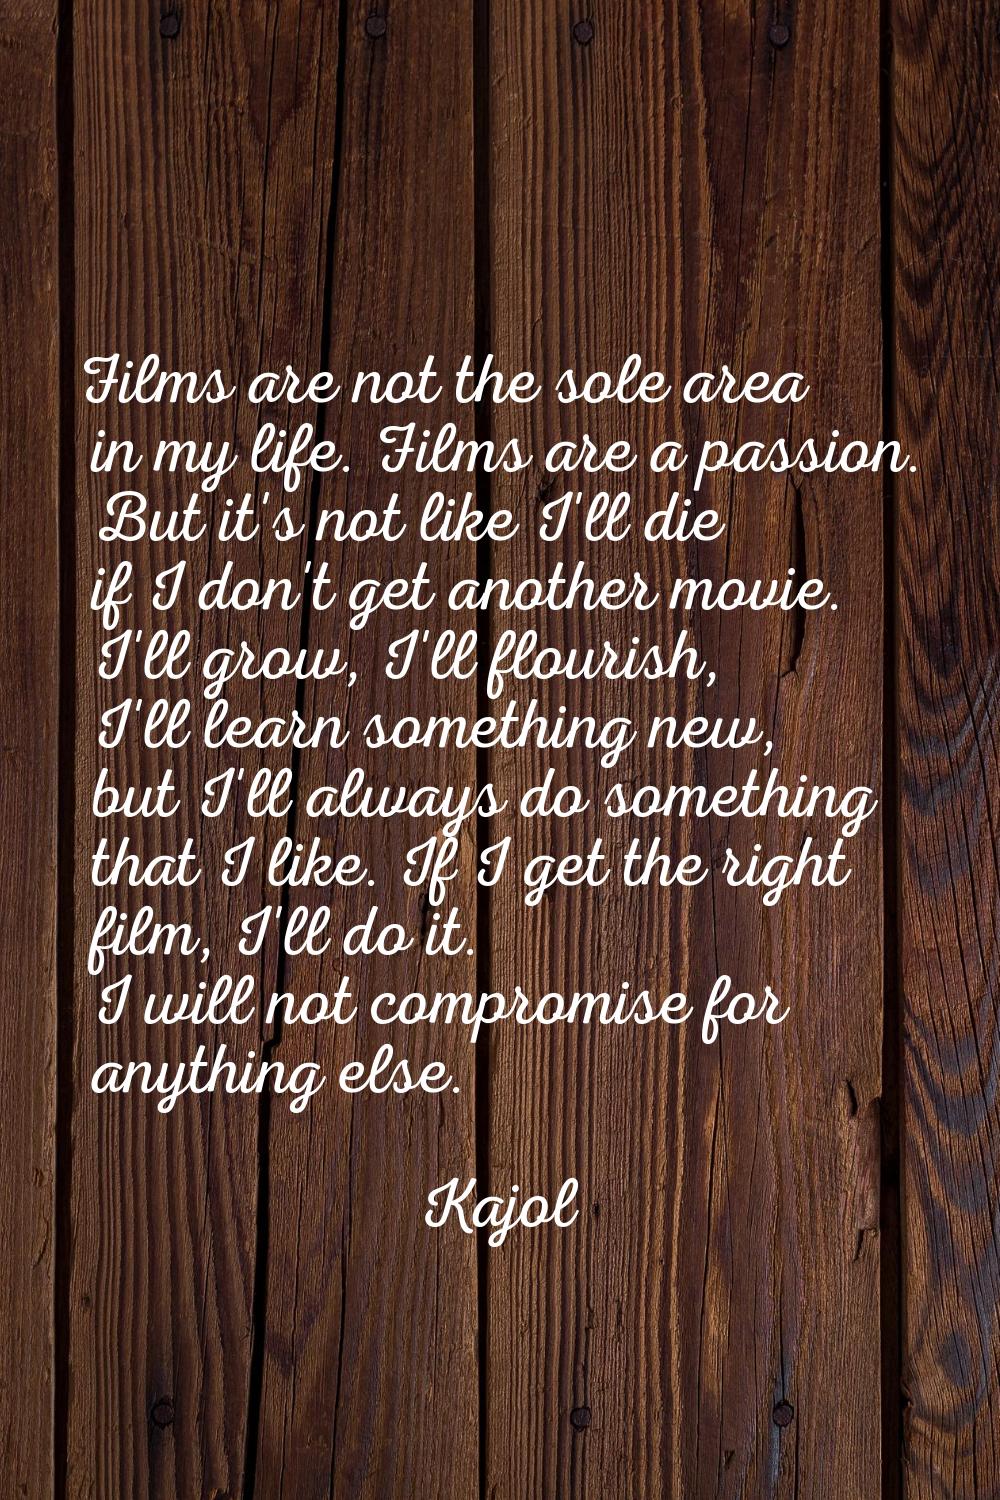 Films are not the sole area in my life. Films are a passion. But it's not like I'll die if I don't 